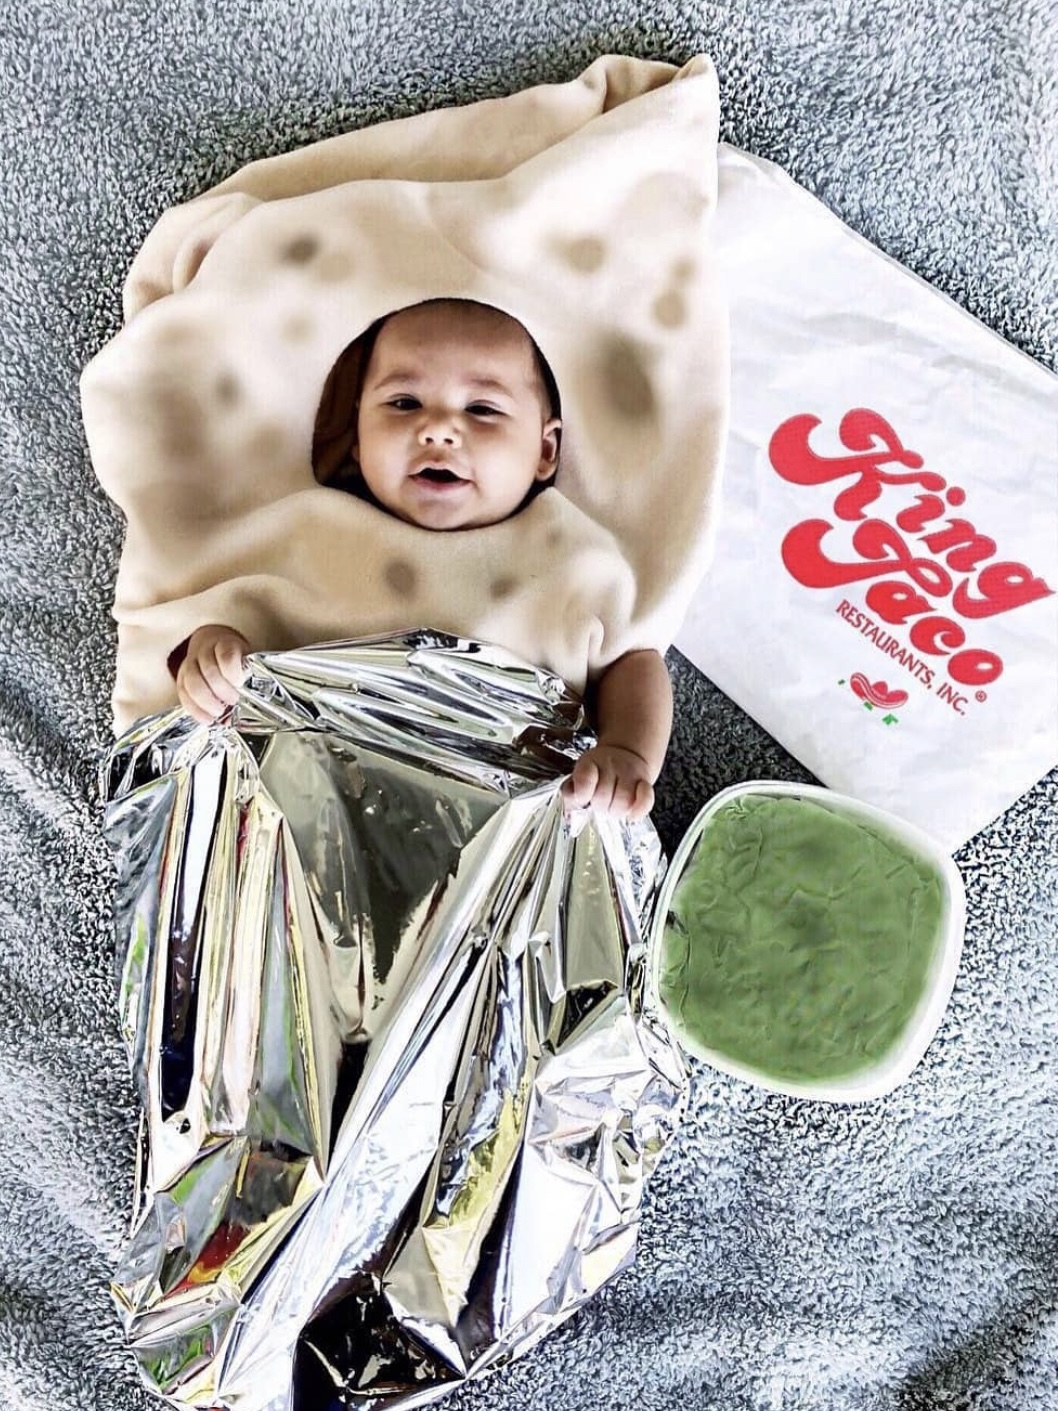 Baby dressed up as King Taco Burrito